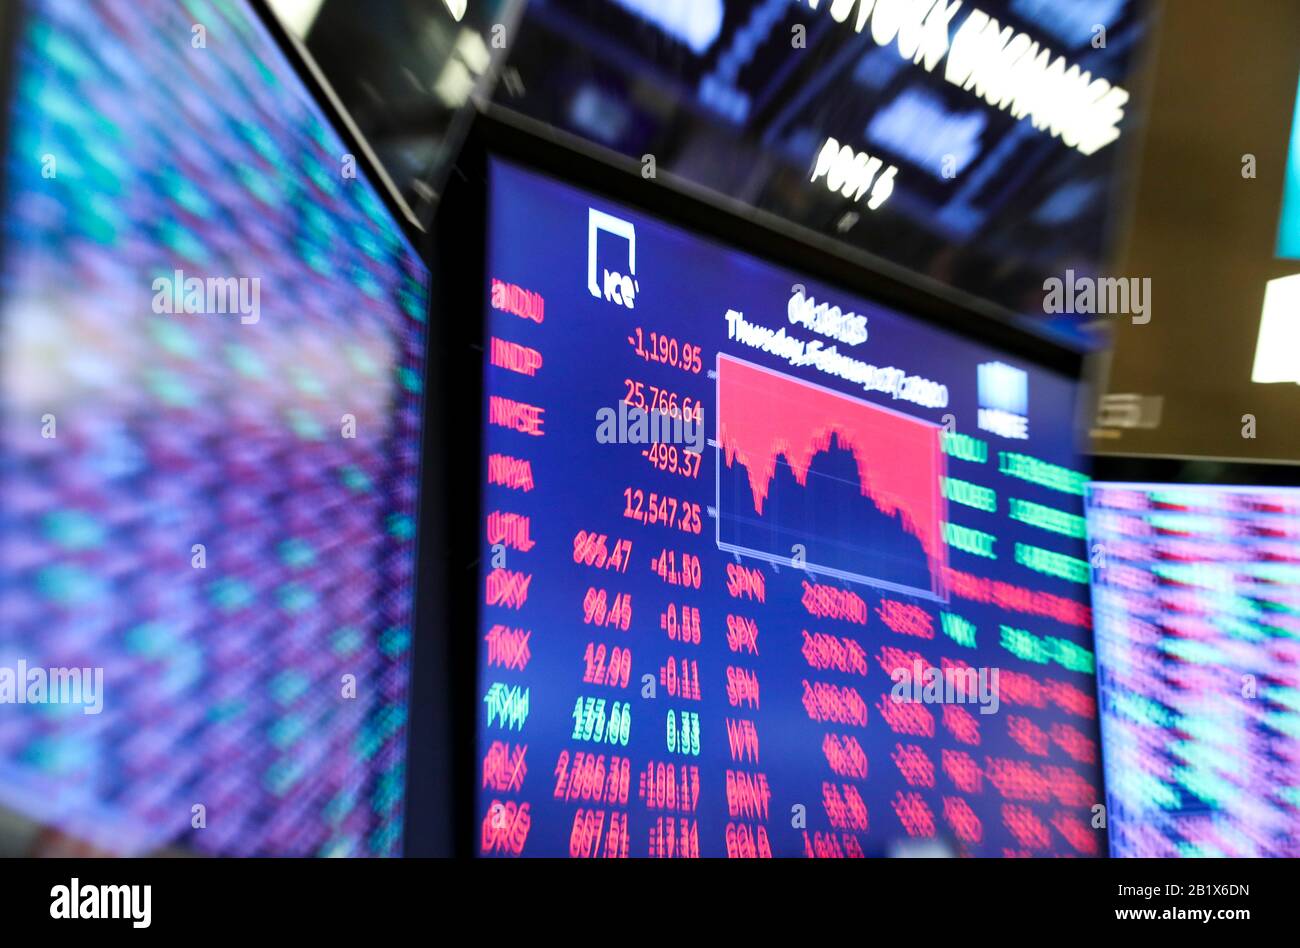 Beijing, USA. 27th Feb, 2020. An electronic screen shows the trading data at the New York Stock Exchange in New York, the United States, Feb. 27, 2020. U.S. stocks closed sharply lower on Thursday as investors fled the stocks market and flocked into safe-haven assets. Credit: Wang Ying/Xinhua/Alamy Live News Stock Photo